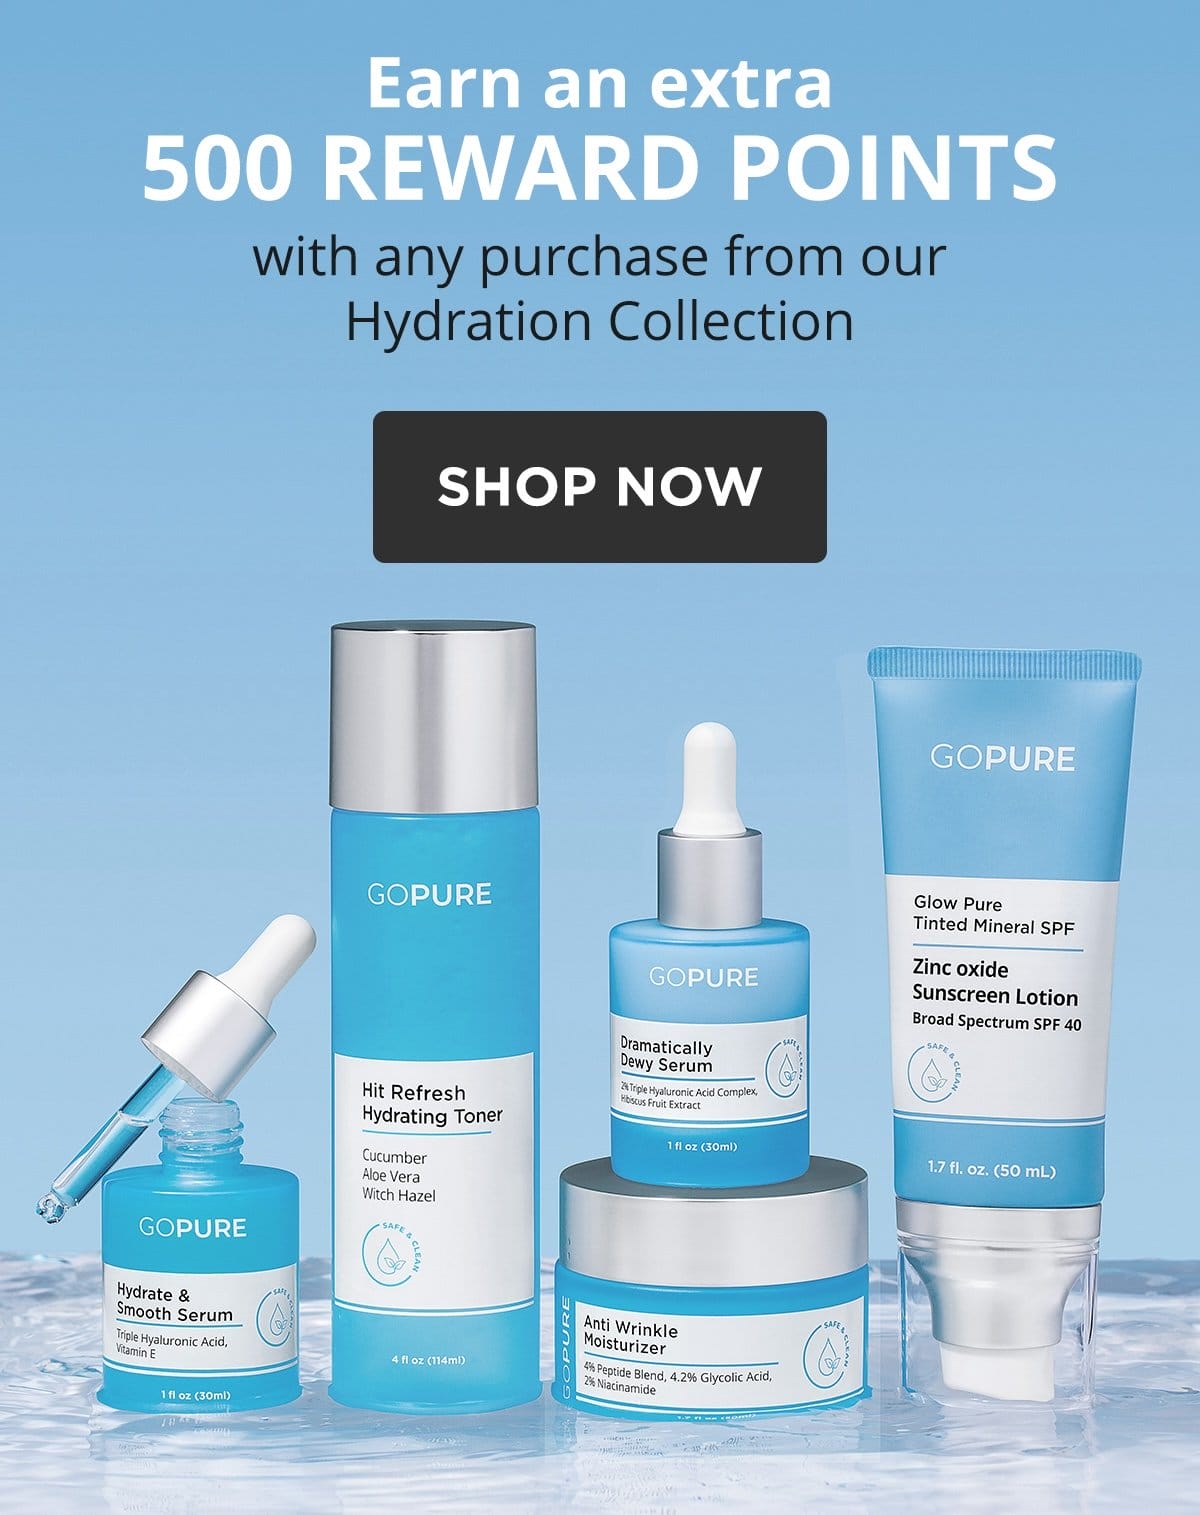 Earn an extra 500 REWARD POINTS with any purchase from our Hydration Collection